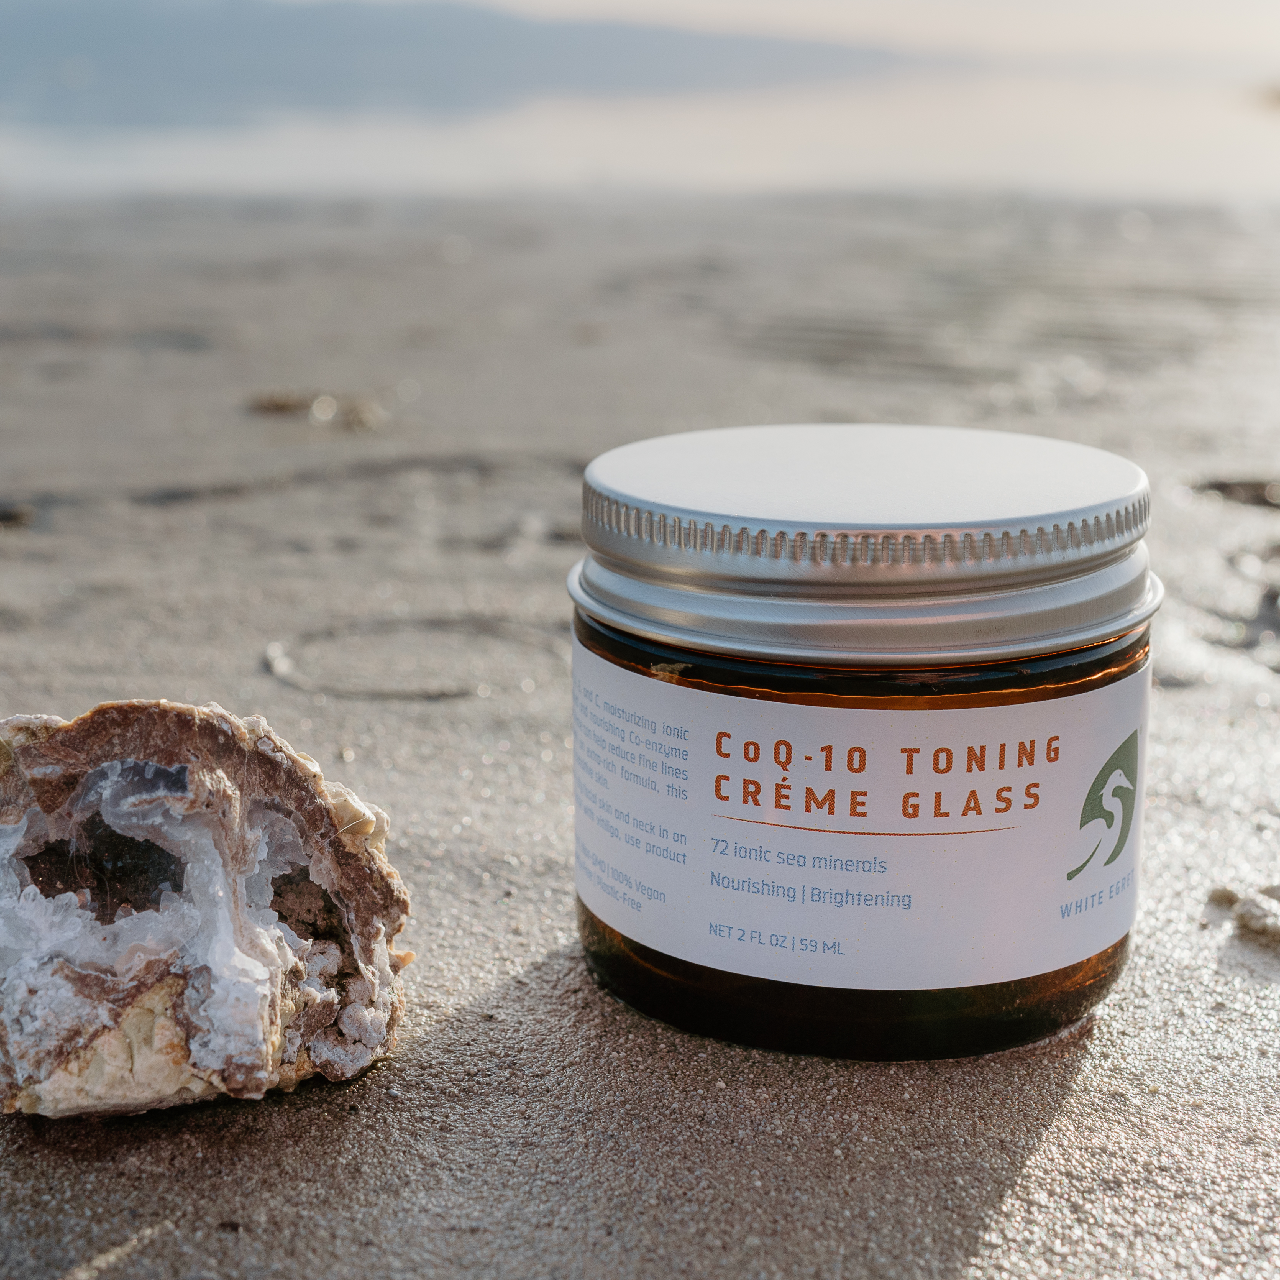 White Egret's Coq-10 Toning Creme in an amber glass jar on the shore of the Great Salt Lake next to a geode with white crystals